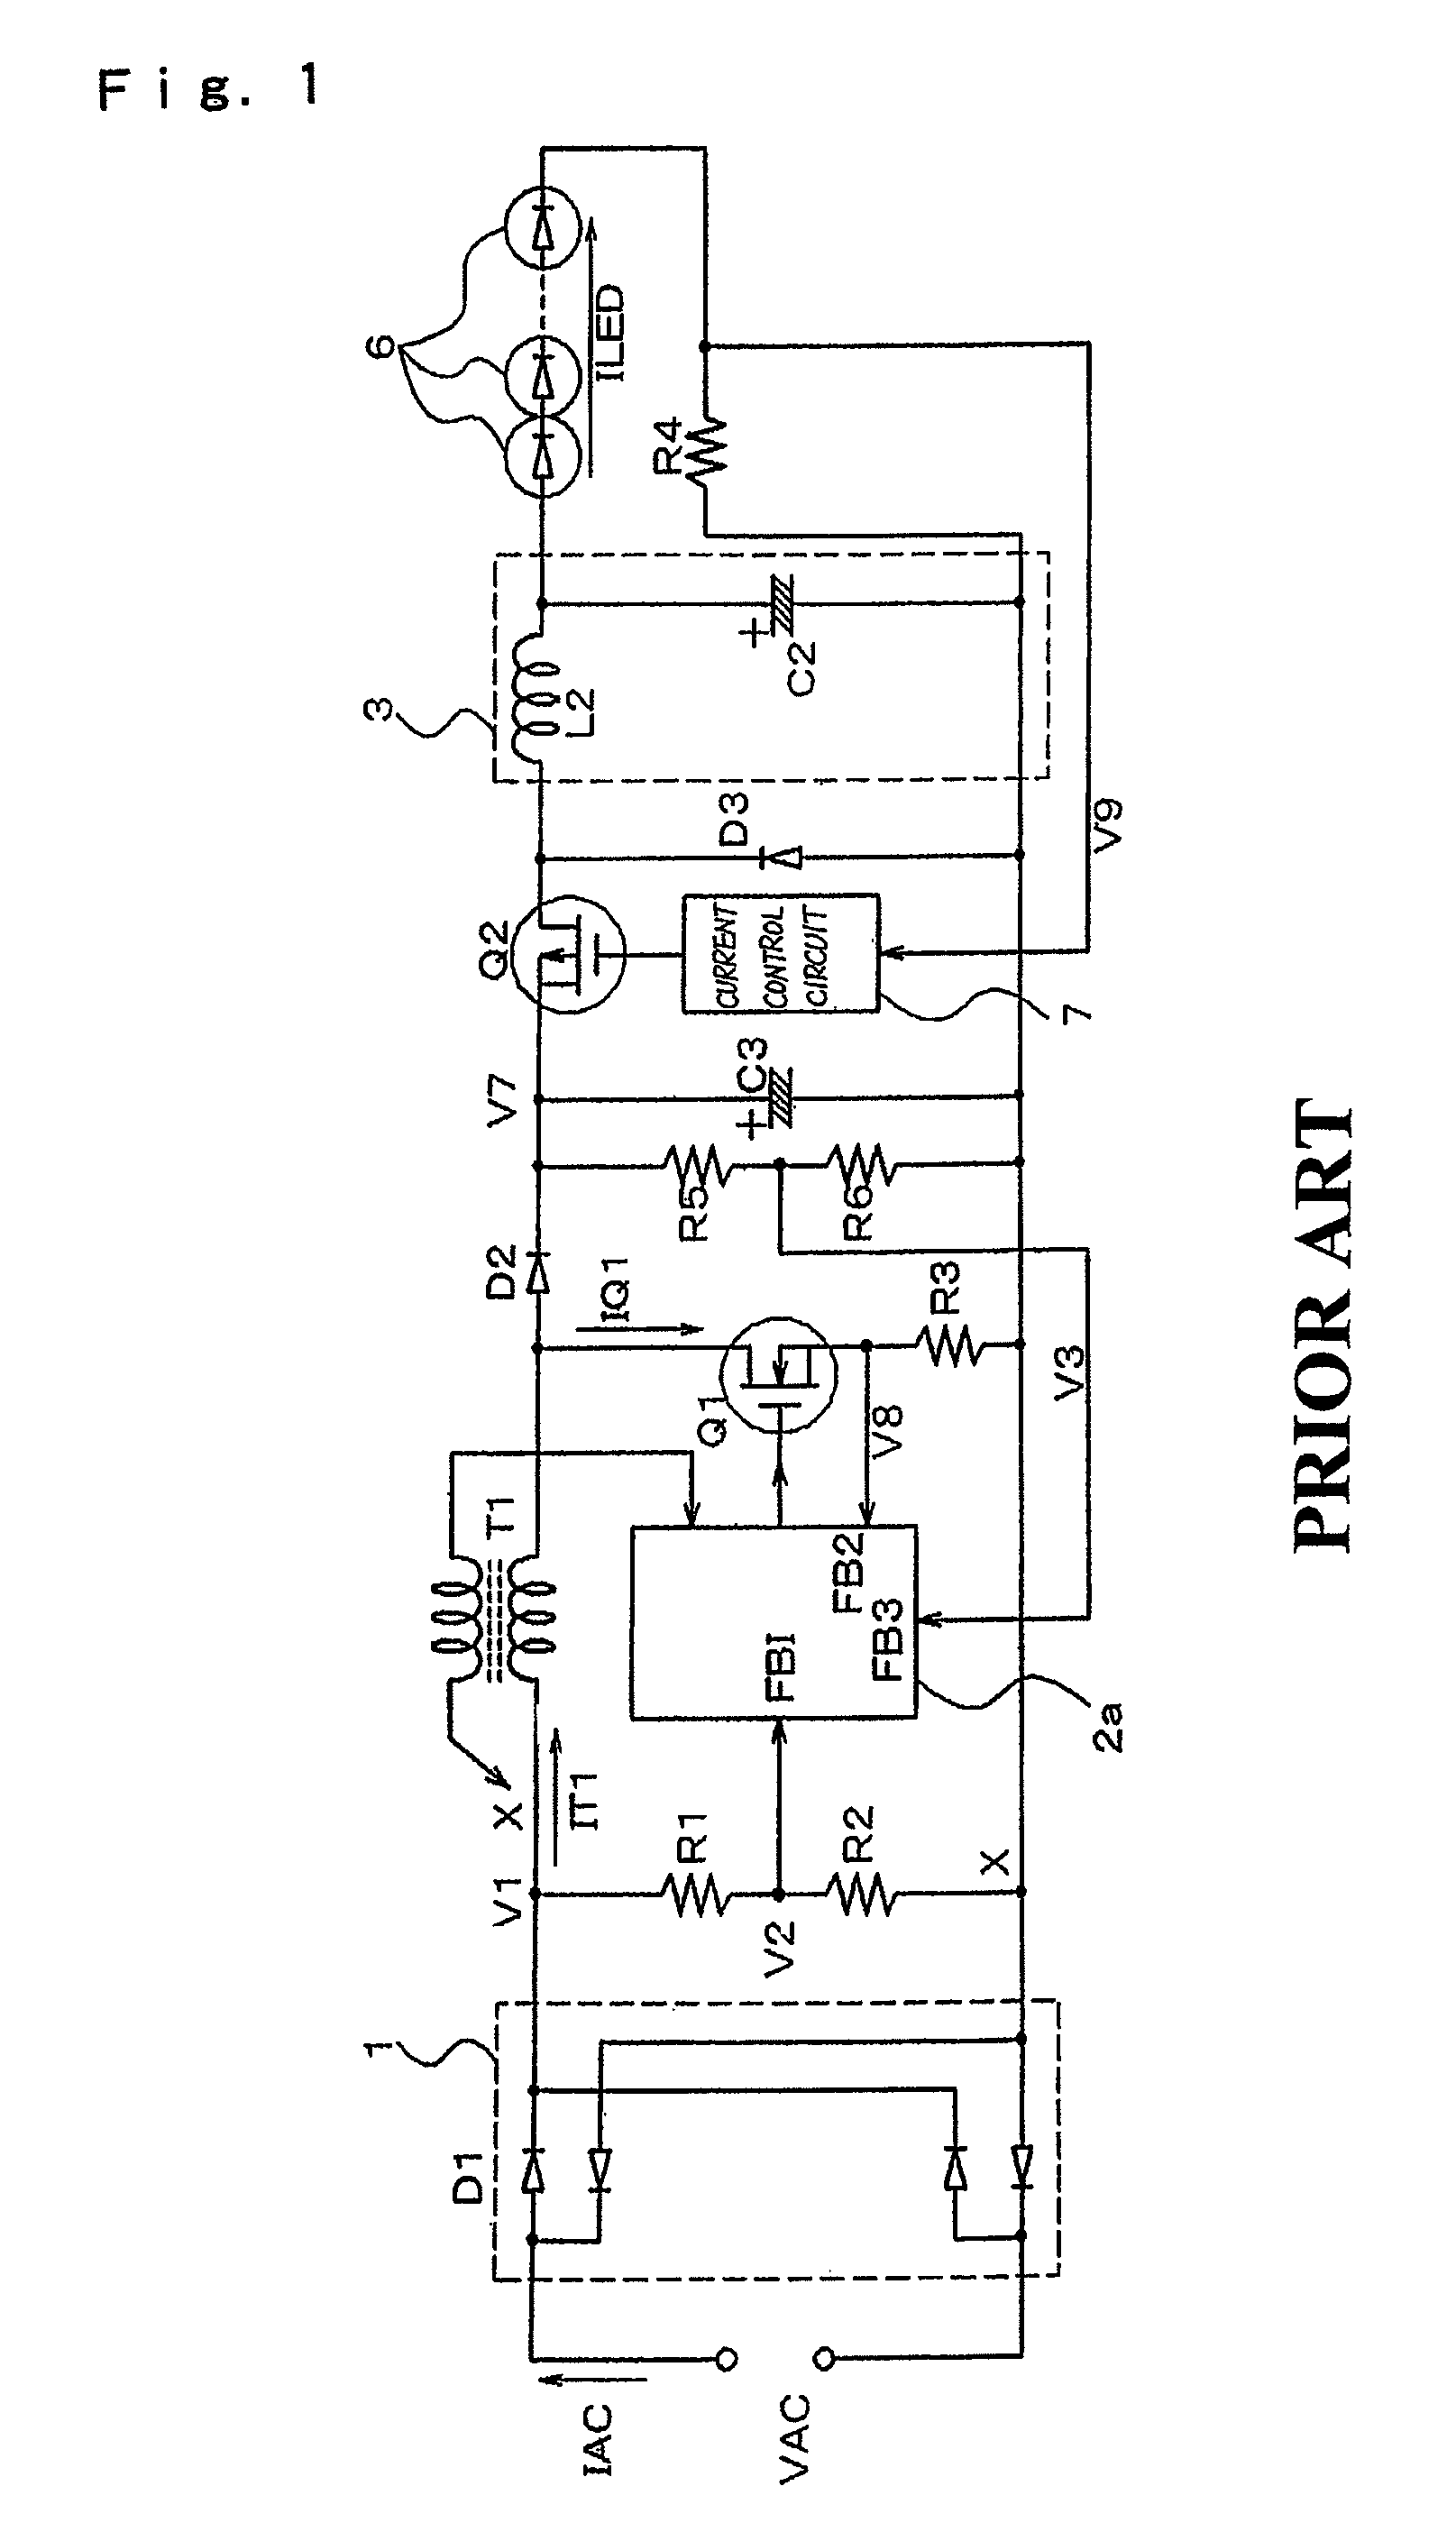 Low-voltage power supply circuit for illumination, illumination device, and low-voltage power supply output method for illumination